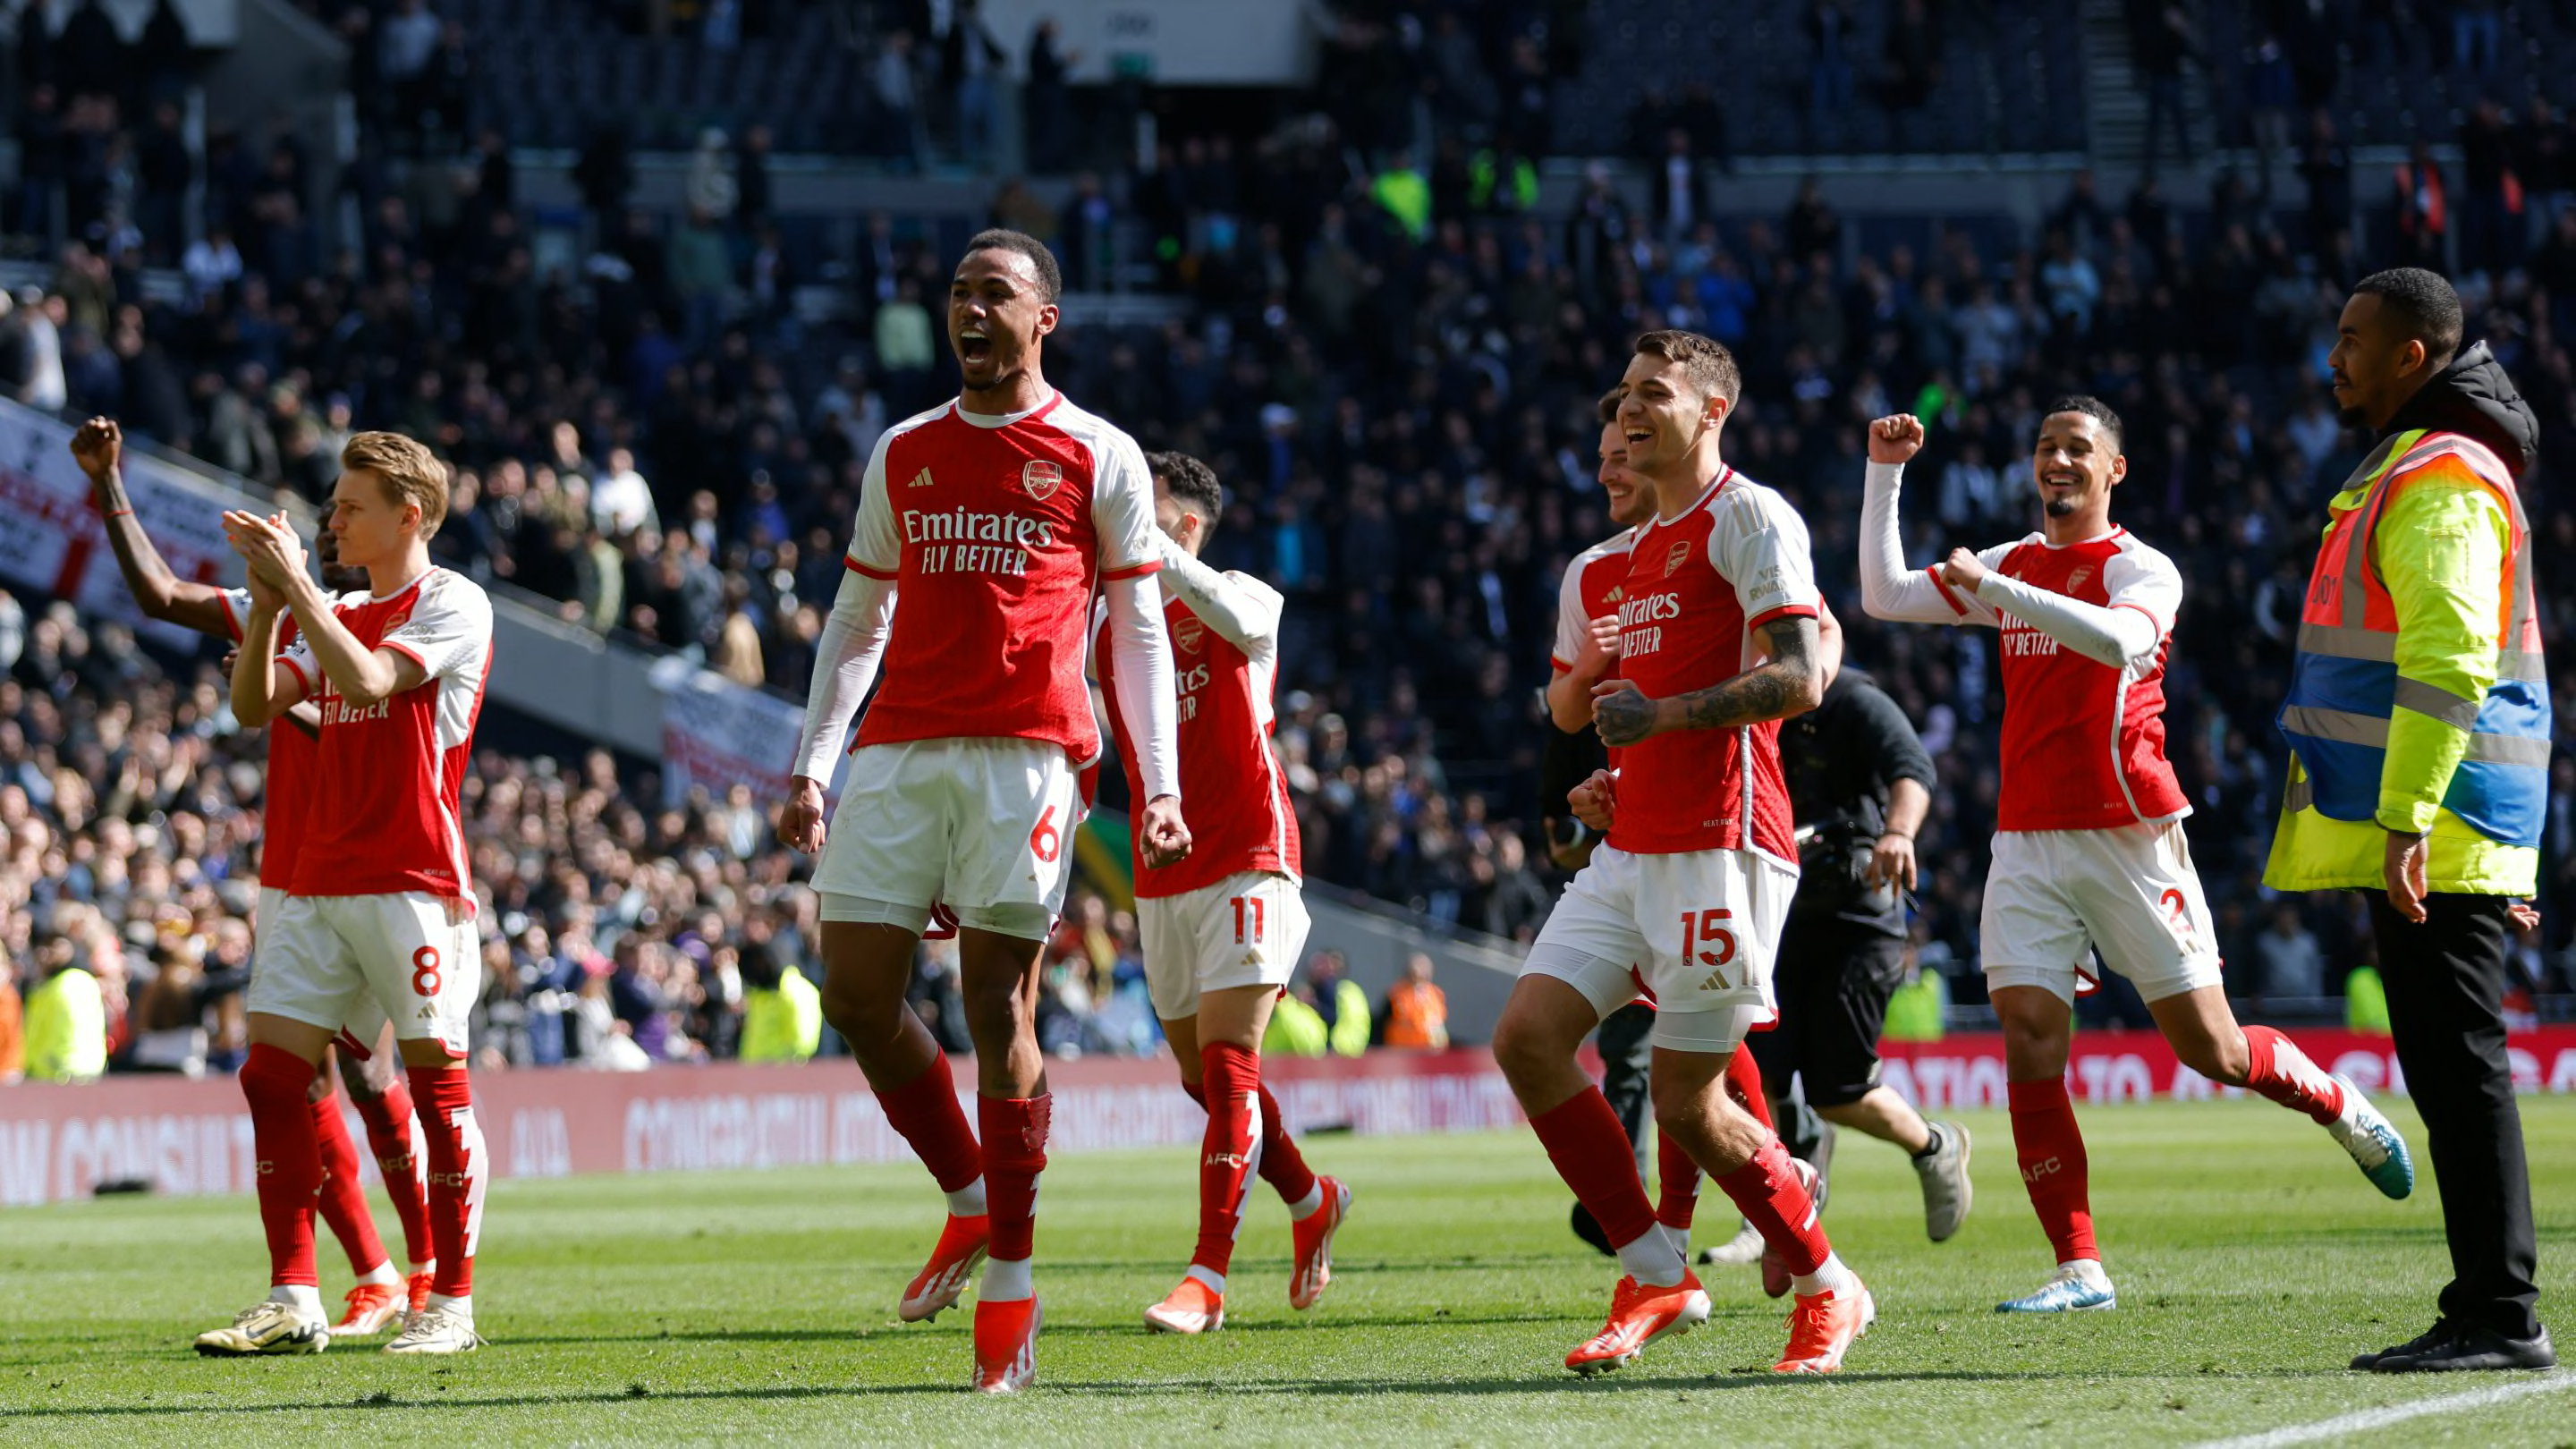 4 things we learned from Arsenal's north London derby win at Tottenham